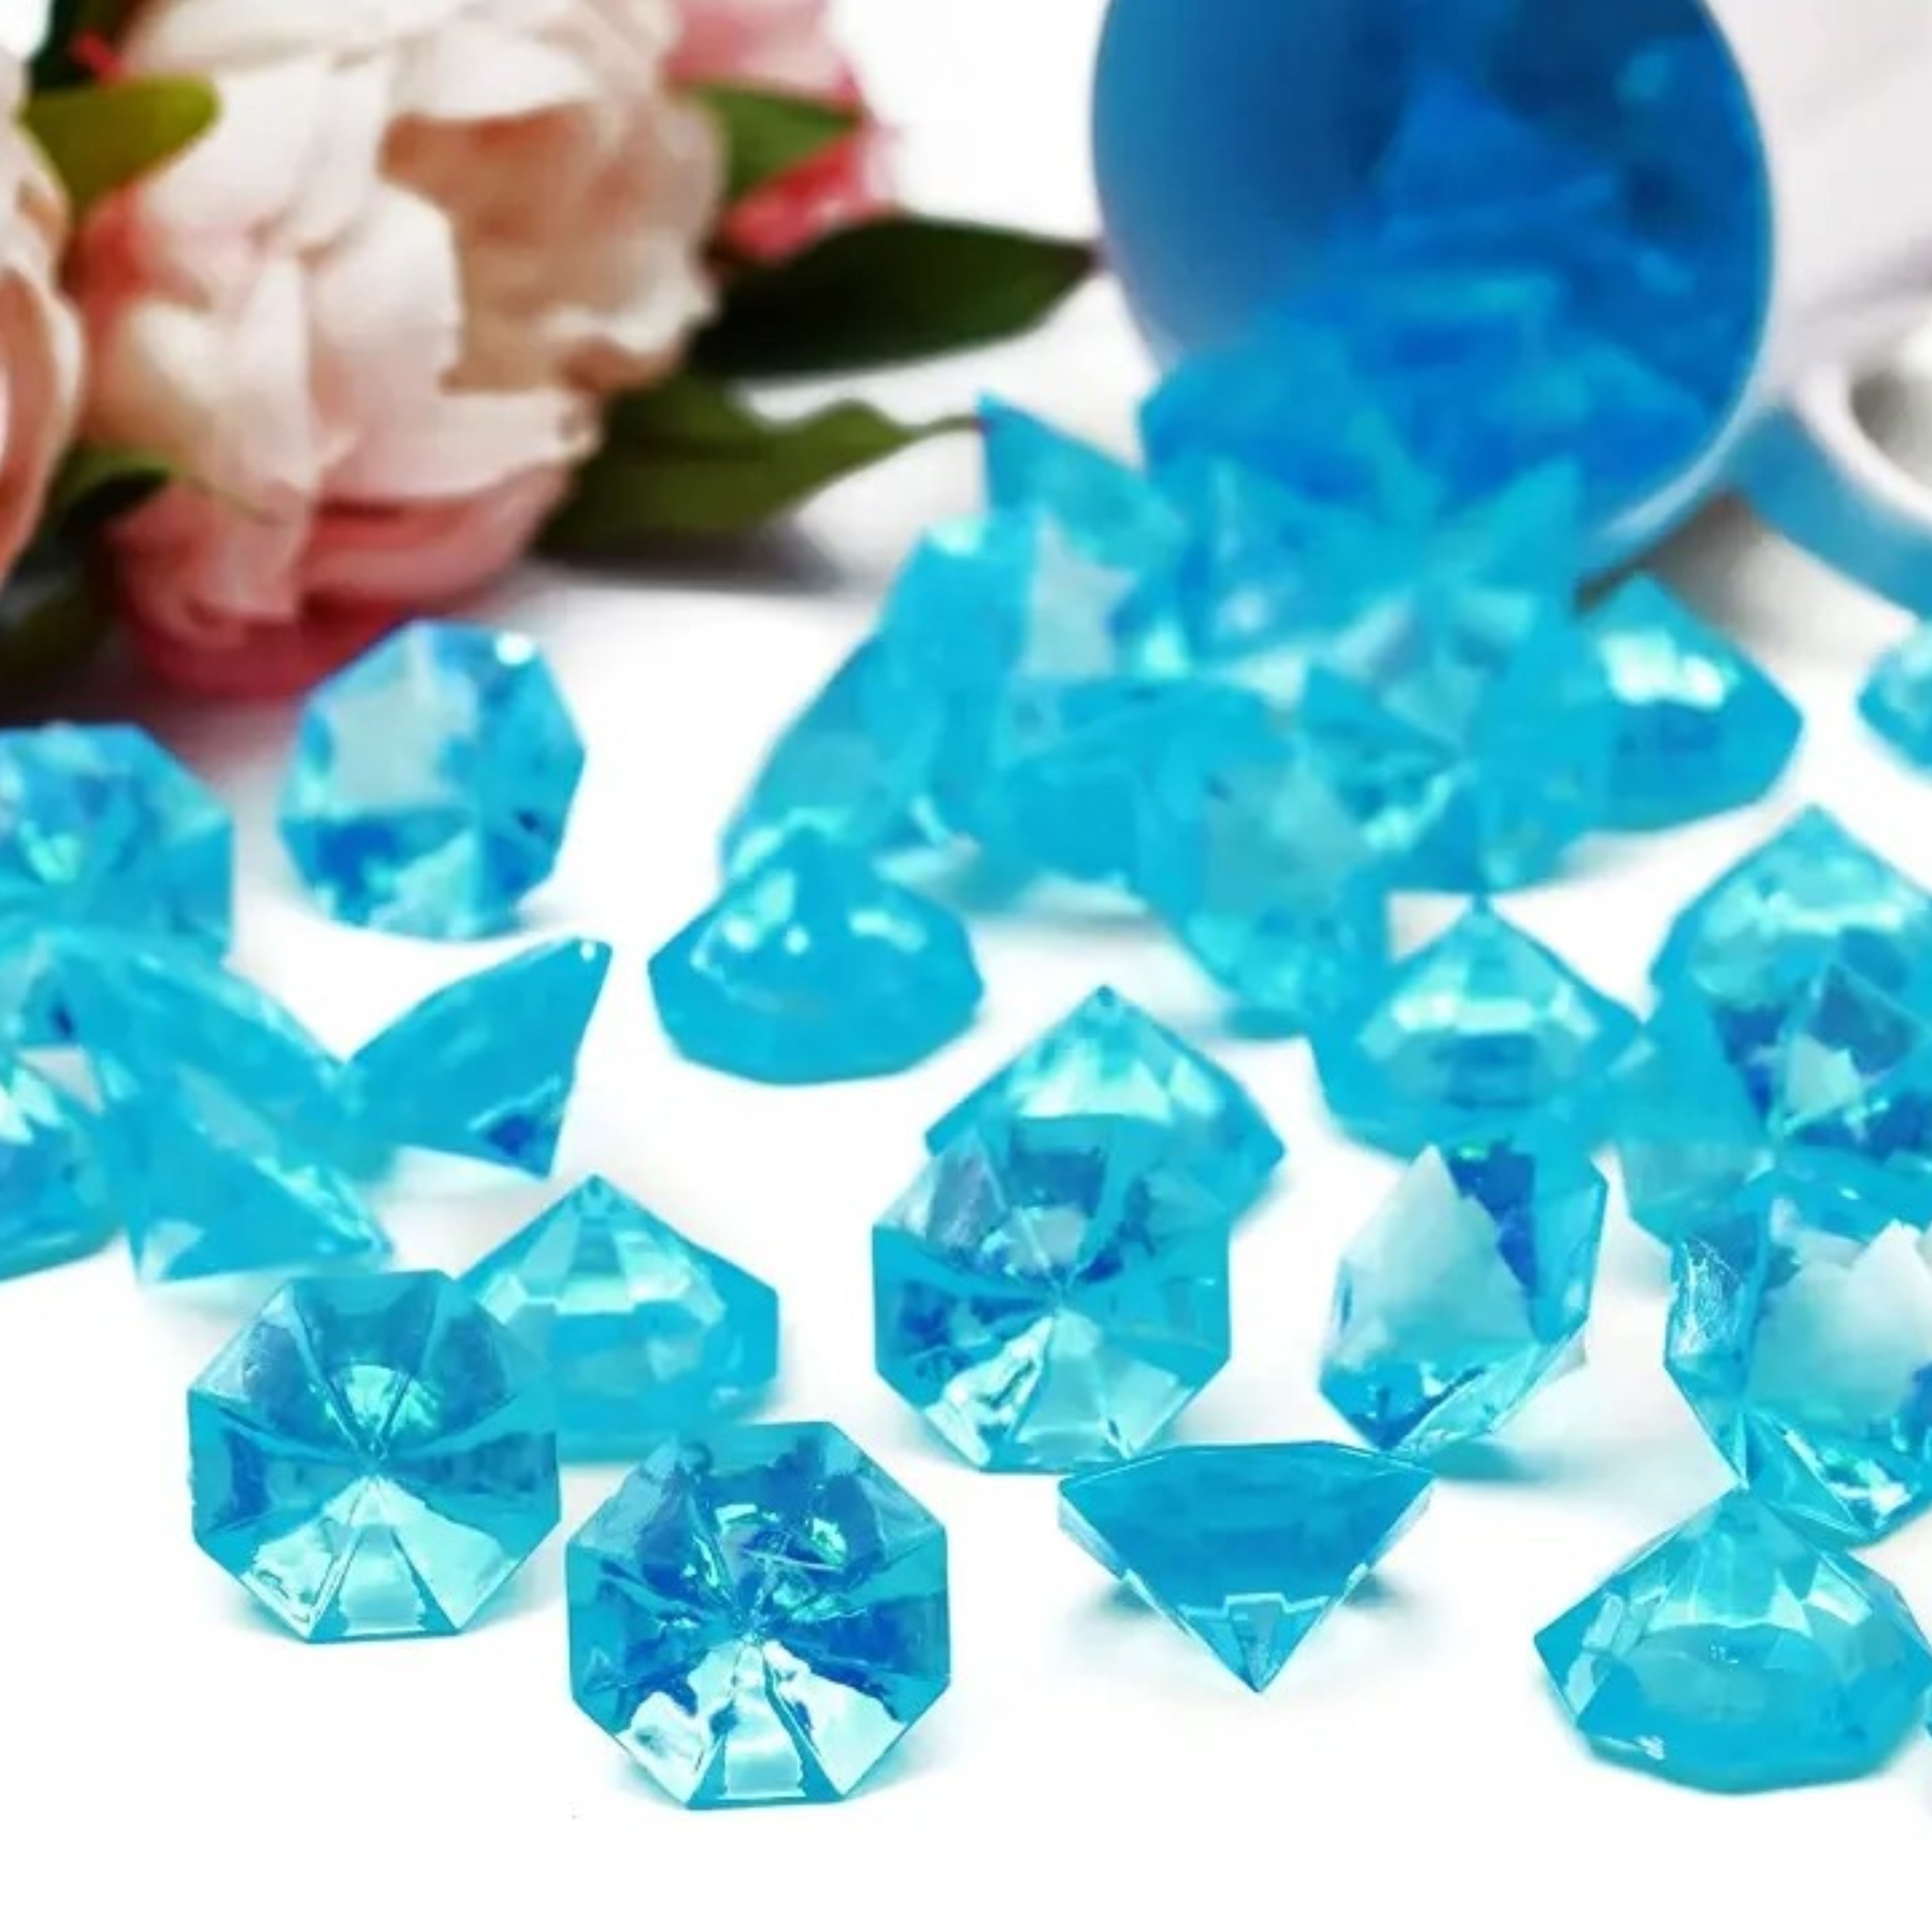 magpross 300 Pieces Plastic Pirate Bulk Faux Diamond Crystals Treasure Gems  Colored Jewels Gems for Tables Decorations, Vase Fillers,Wedding or